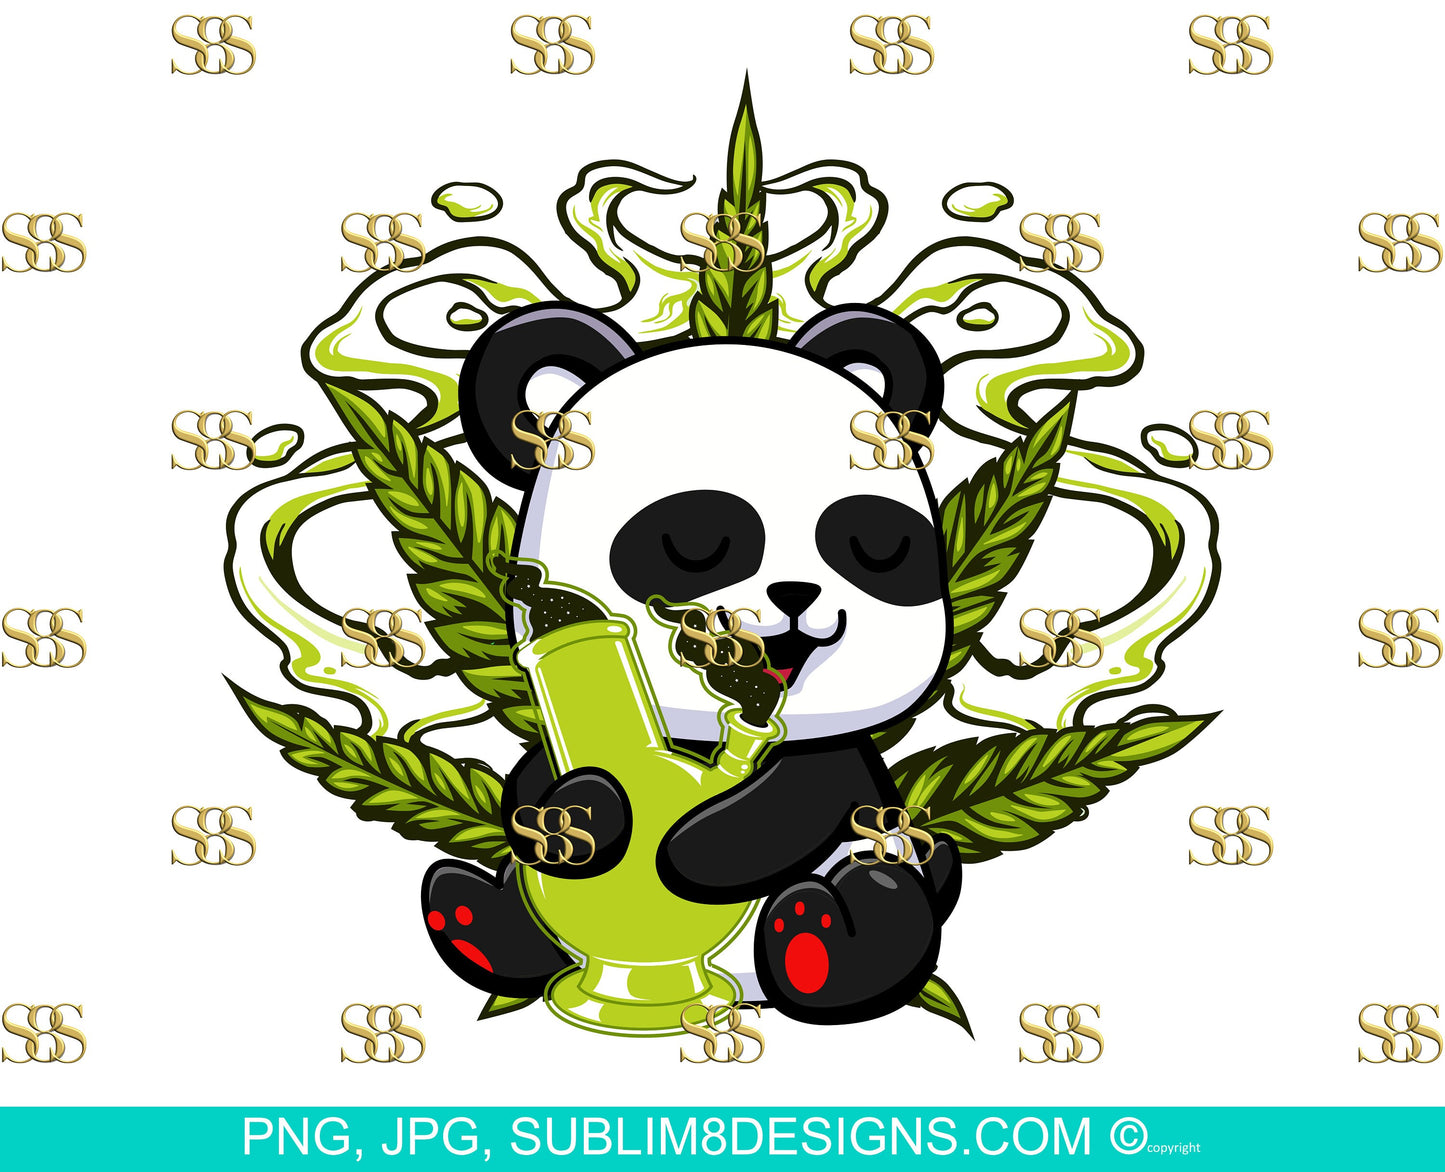 Panda Canabis PNG and JPG ONLY